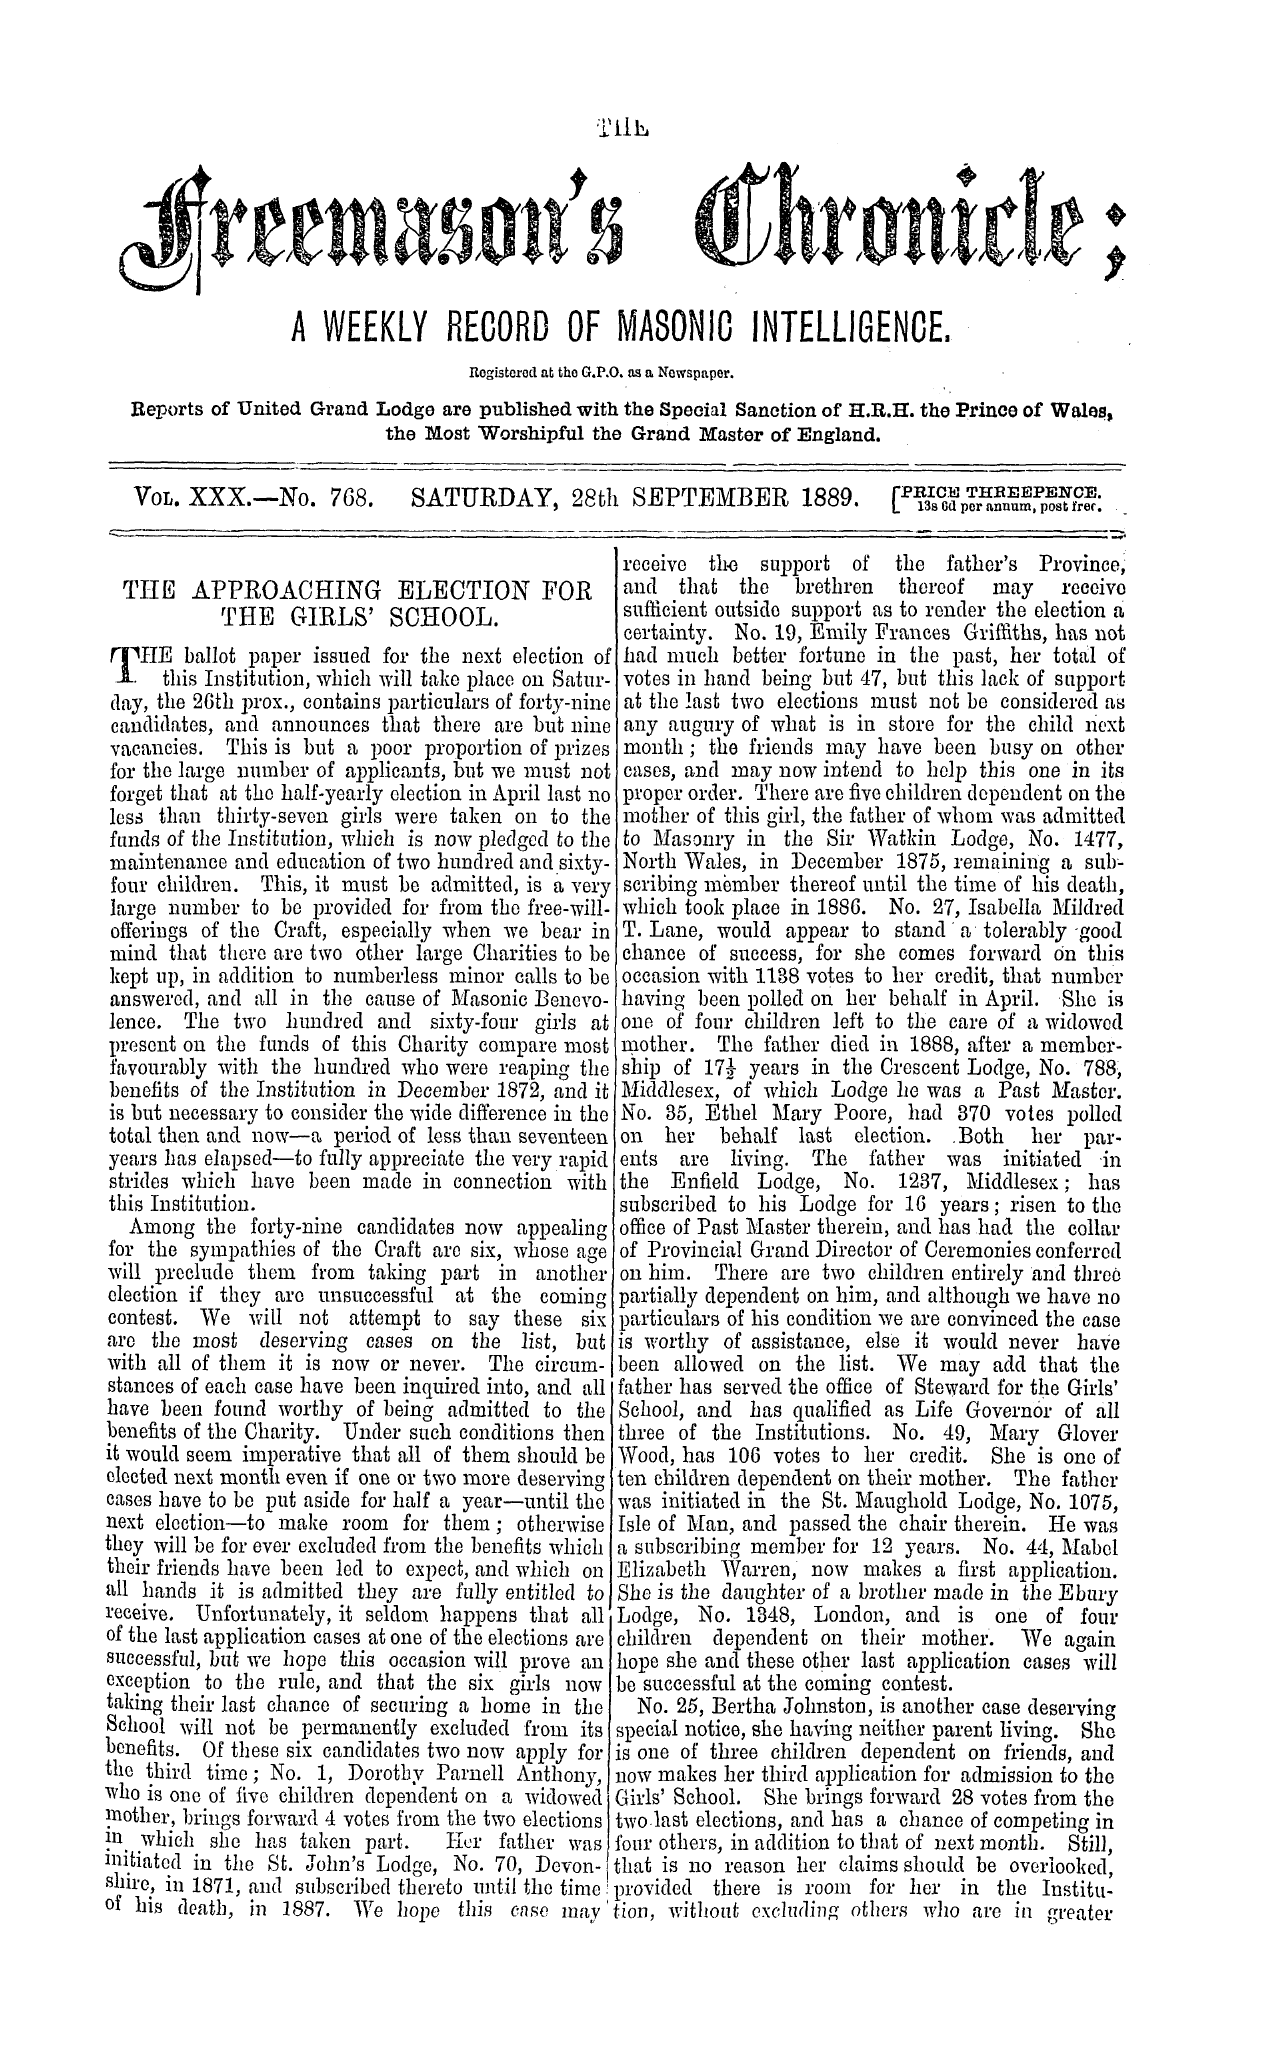 The Freemason's Chronicle: 1889-09-28 - The Approaching Election For The Girls' School.